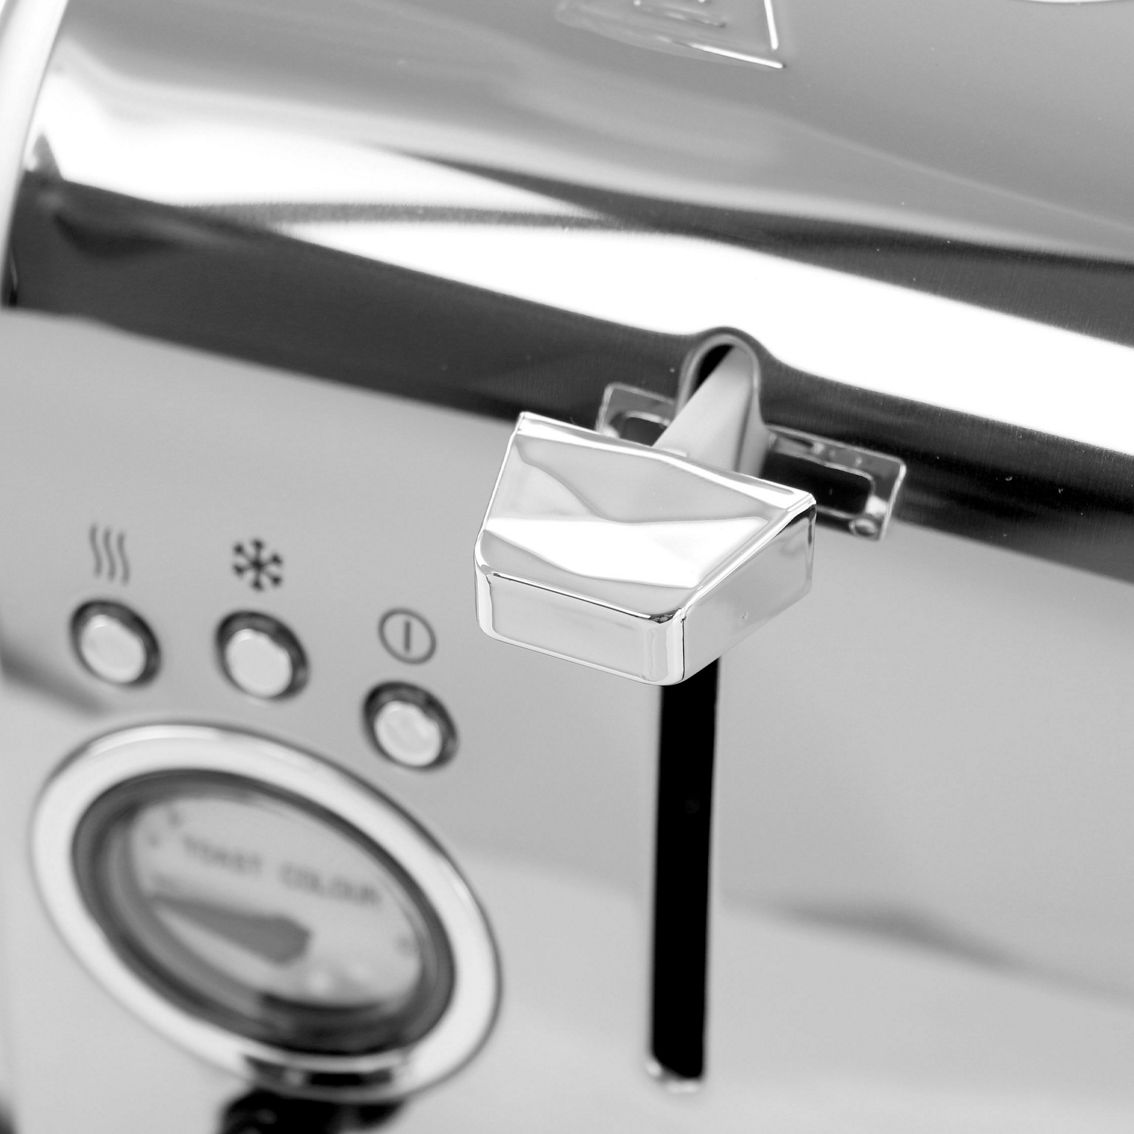 MegaChef 4 Slice Wide Slot Toaster with Variable Browning in Silver - Image 5 of 5